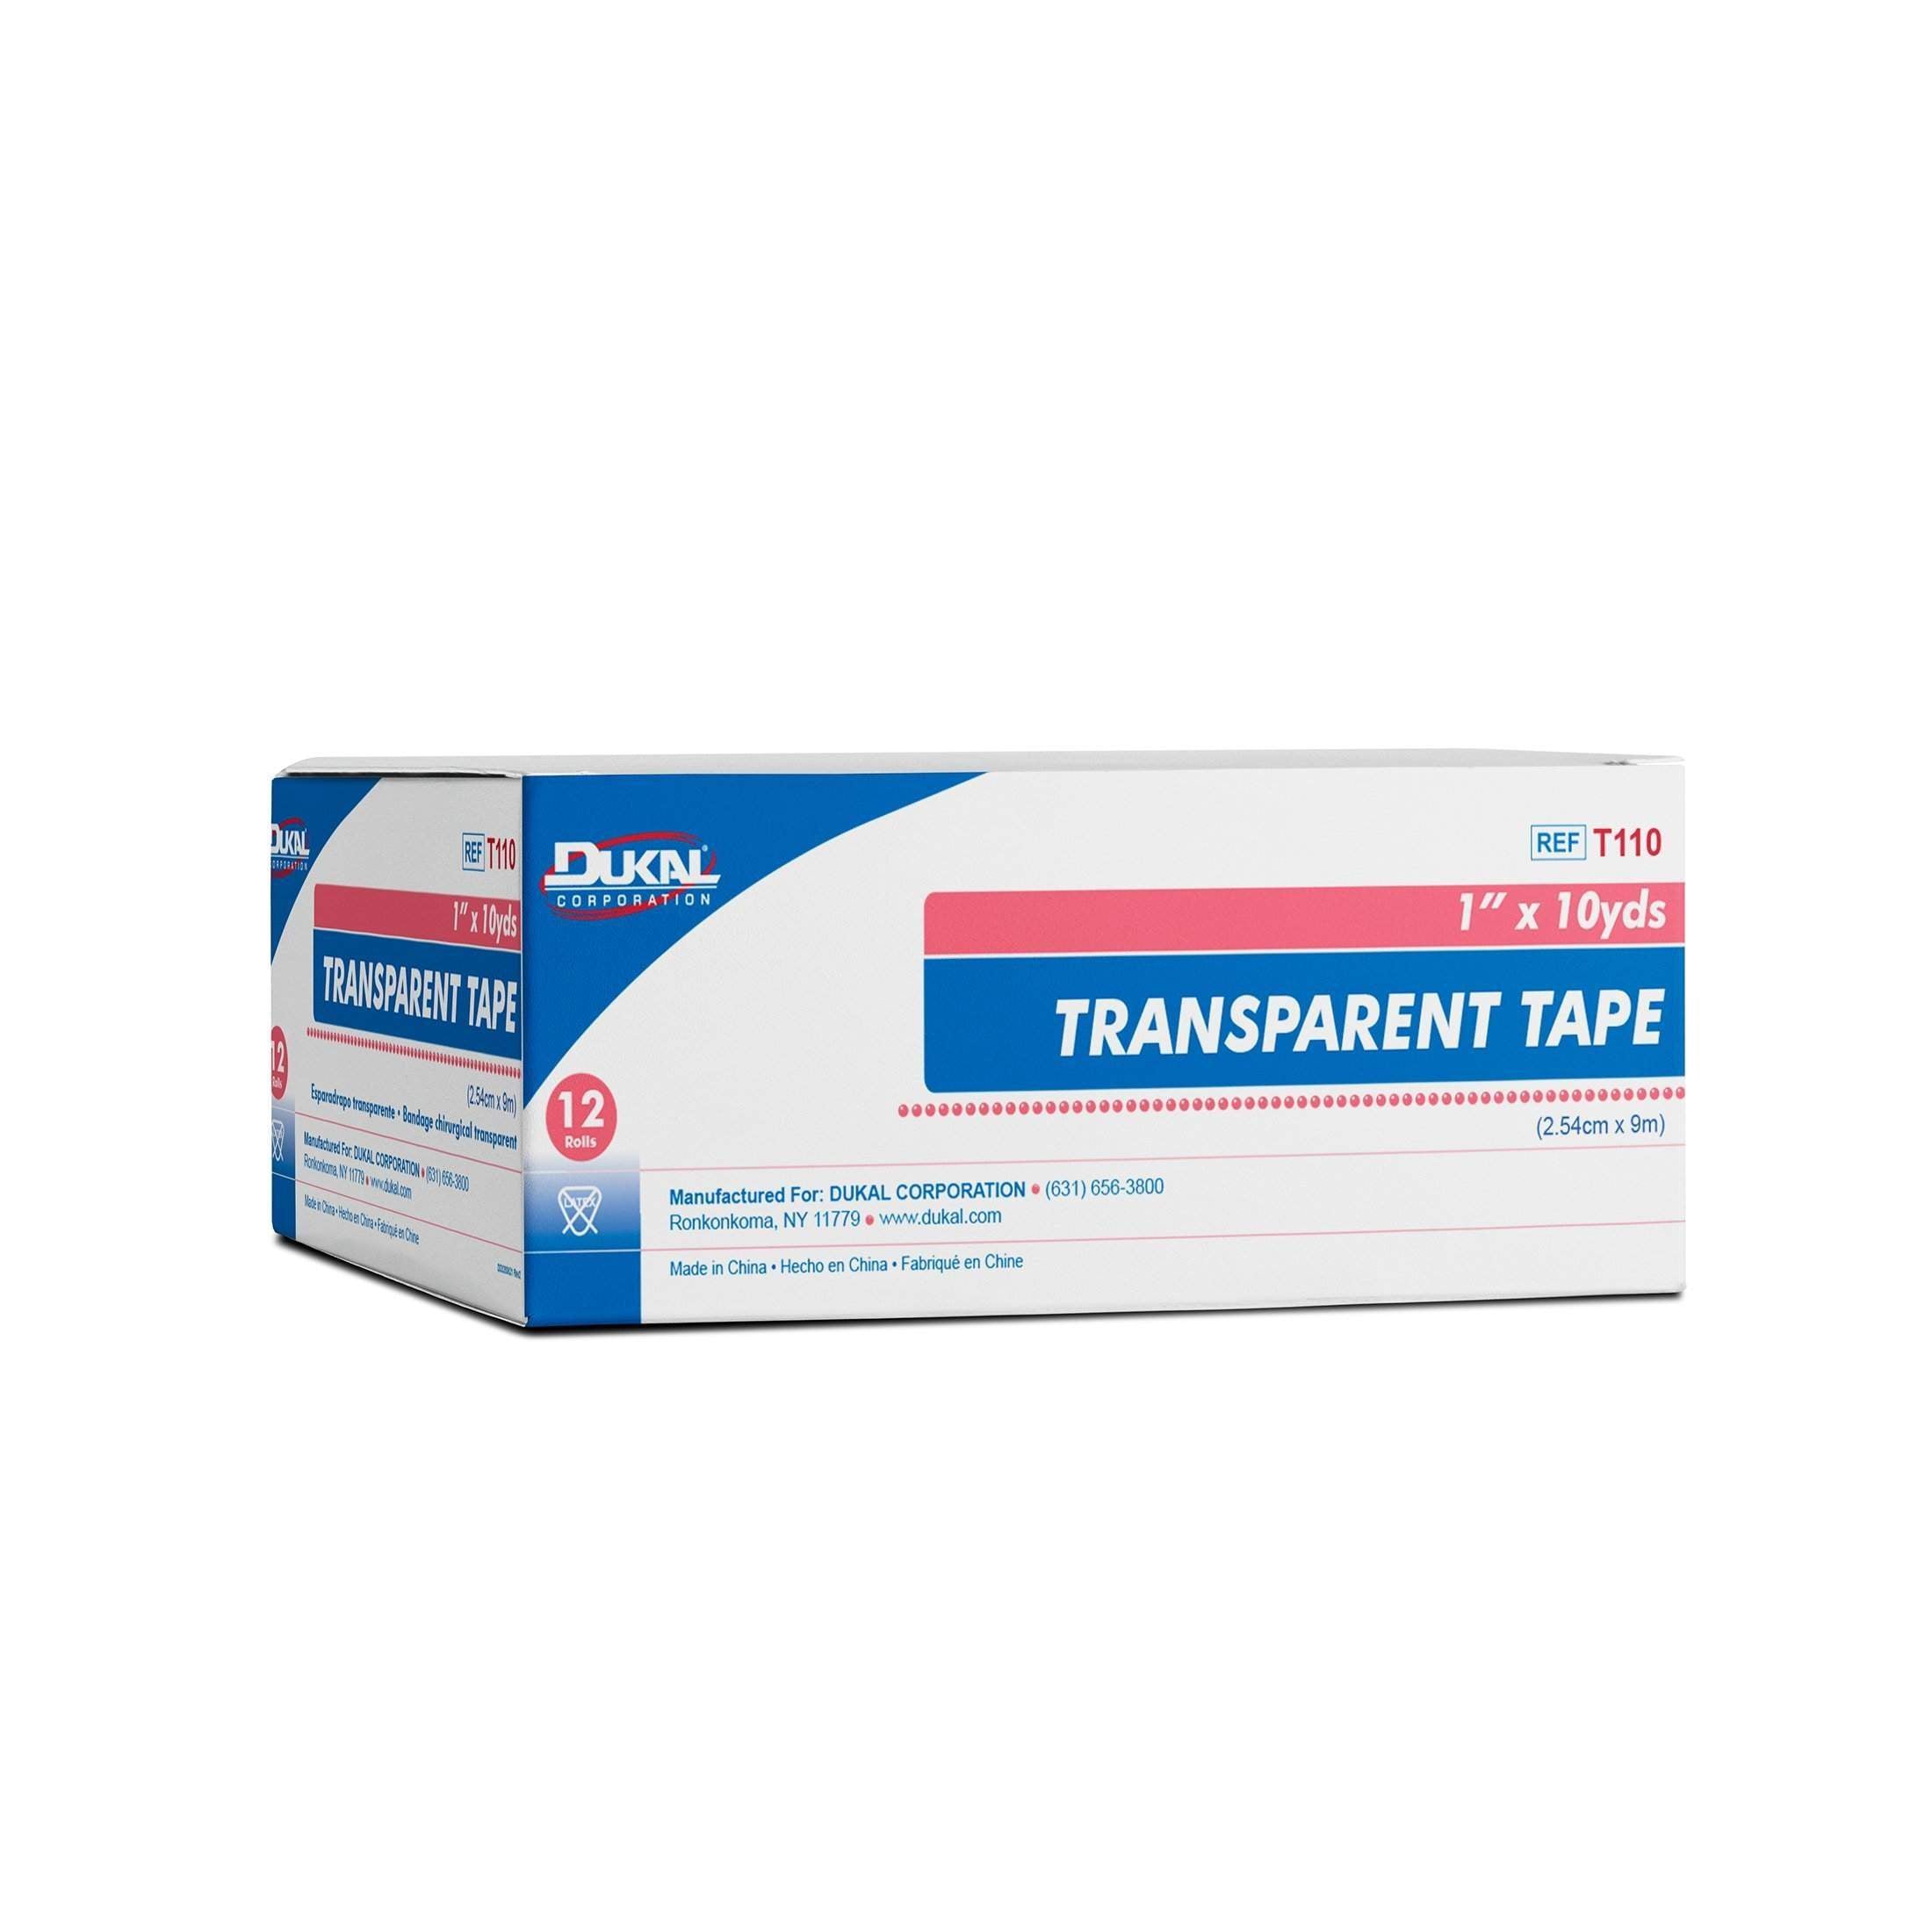 Dukal-18224M Transparent Surgical Tape, Box of 12 Rolls,1 Inches Width x 10 Yards Length-Dukal-Brand_Dukal/ Dawn Mist,Collection_Lifestyle,Dukal_Medical,Dukal_Tapes,Life_Medical,Life_Personal Care